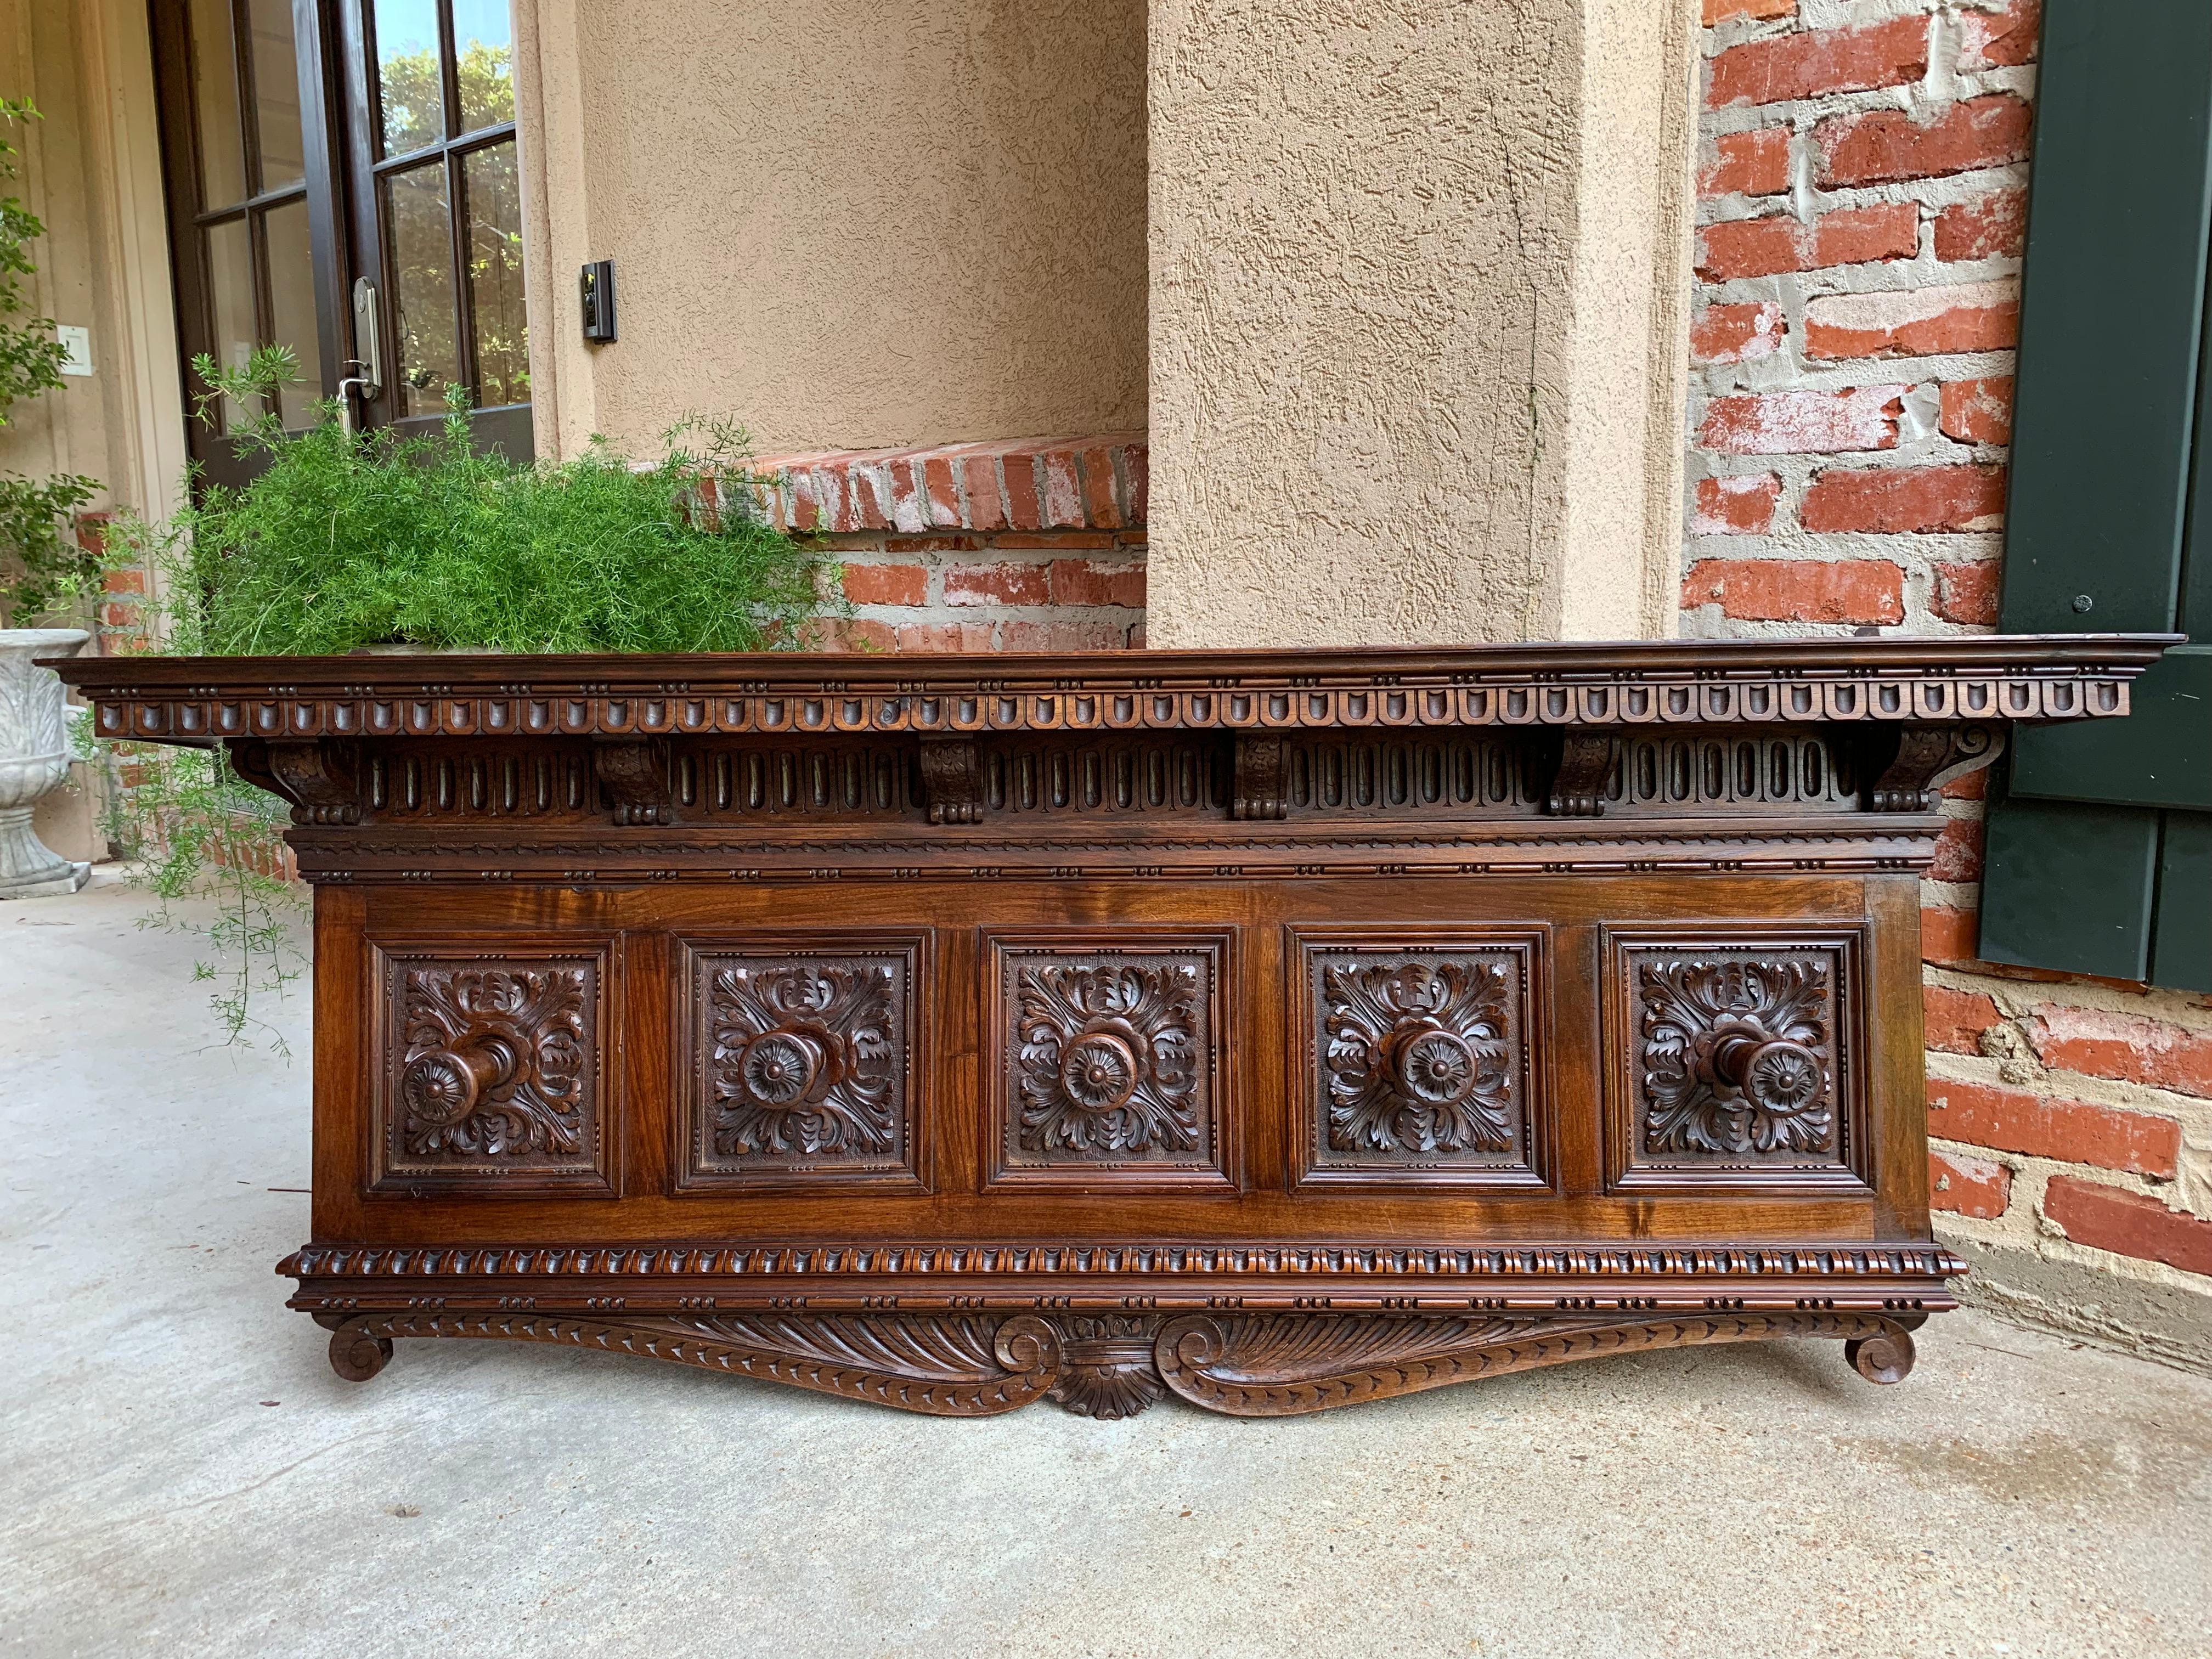 Direct from Italy, an ornately carved oak Italian Renaissance Revival wall shelf~
(One of two from our most recent container)
~FIVE carved wood posts for hanging hats, coats, etc~
~This would also be beautiful as a carved panel to hang above a